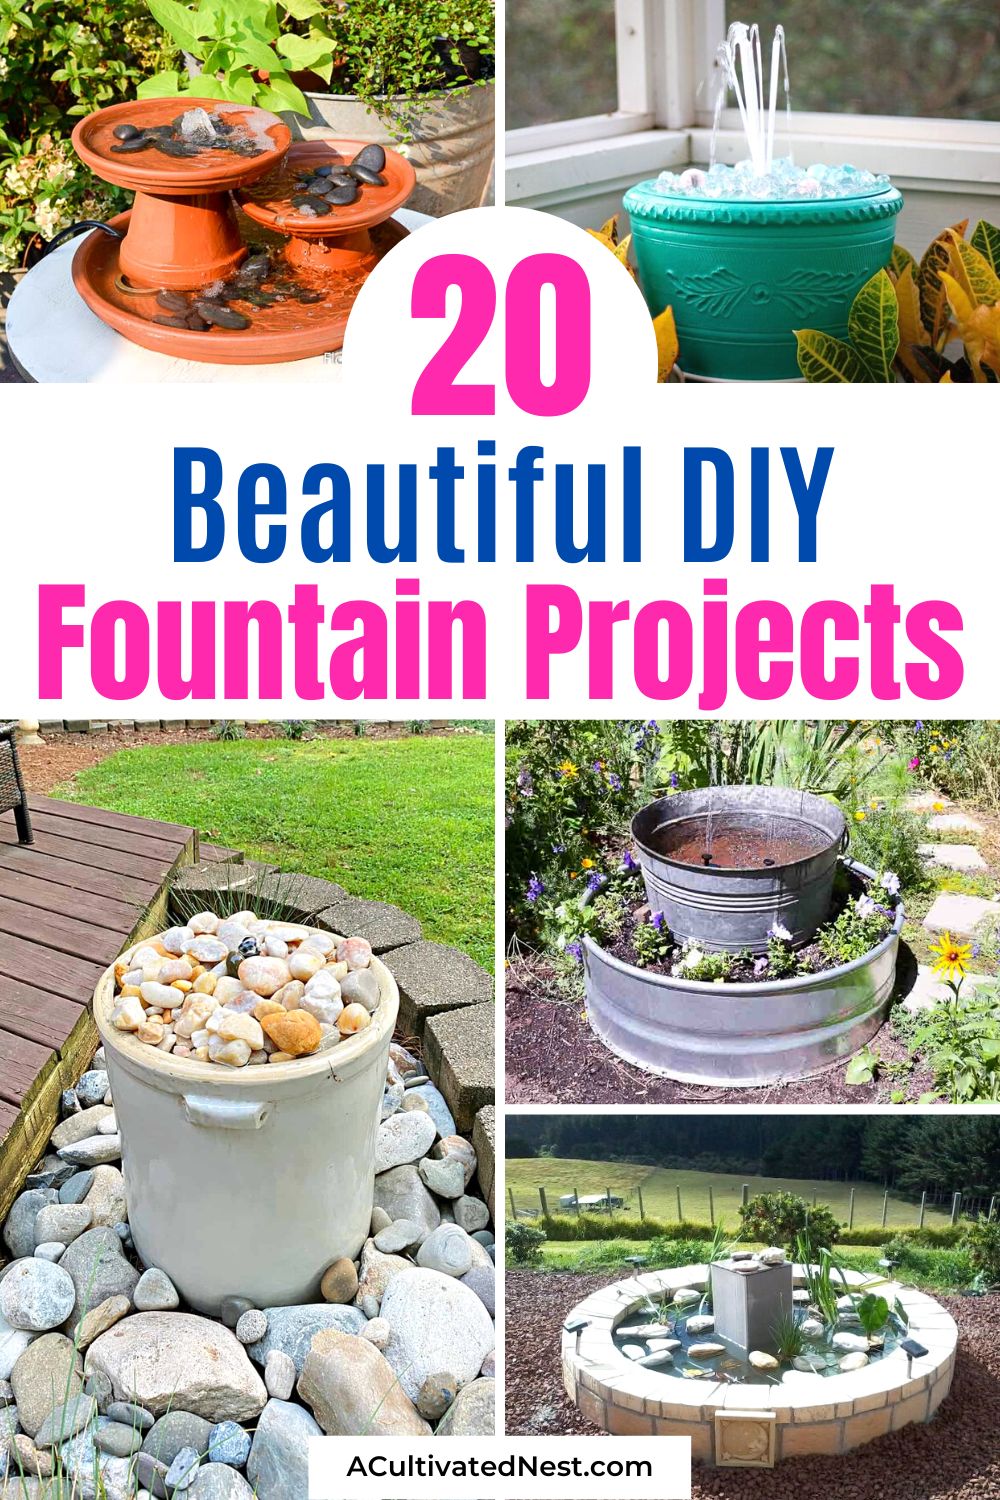 20 Beautiful DIY Fountain Ideas-Transform your outdoor space into a tranquil oasis with these beautiful DIY fountain ideas. These creative fountain projects will add a touch of serenity and charm to your garden, and do it on a budget! | how to make a homemade garden fountain, DIY bubble fountain, #diyFountains #diyProjects #DIY #gardenIdeas #ACultivatedNest